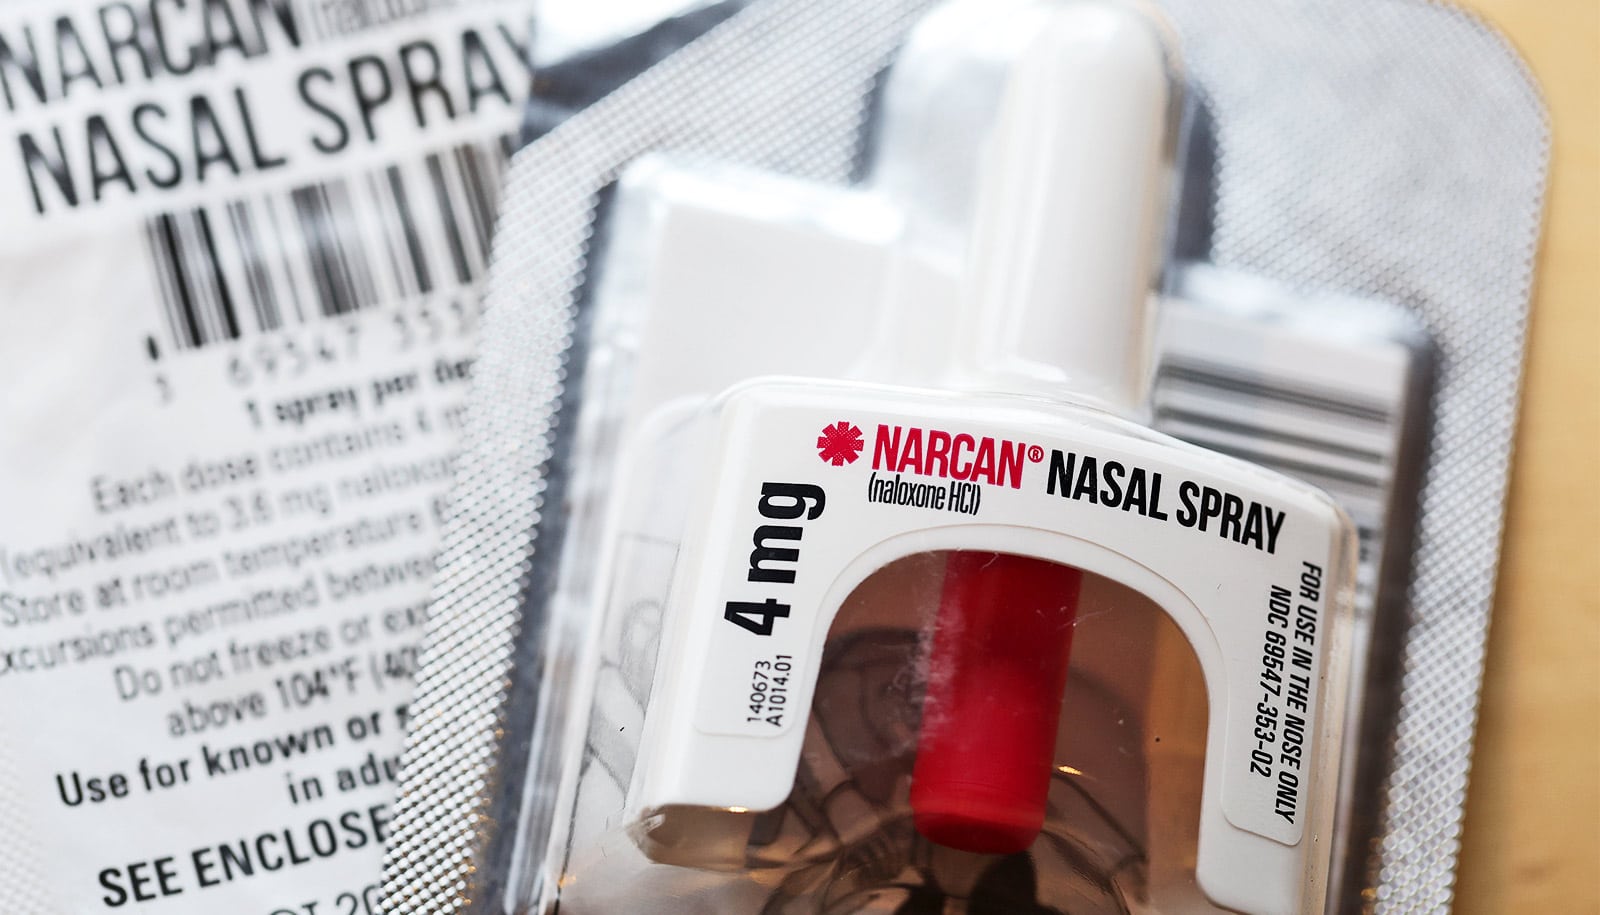 Out-of-pocket costs may keep people from filling naloxone prescriptions